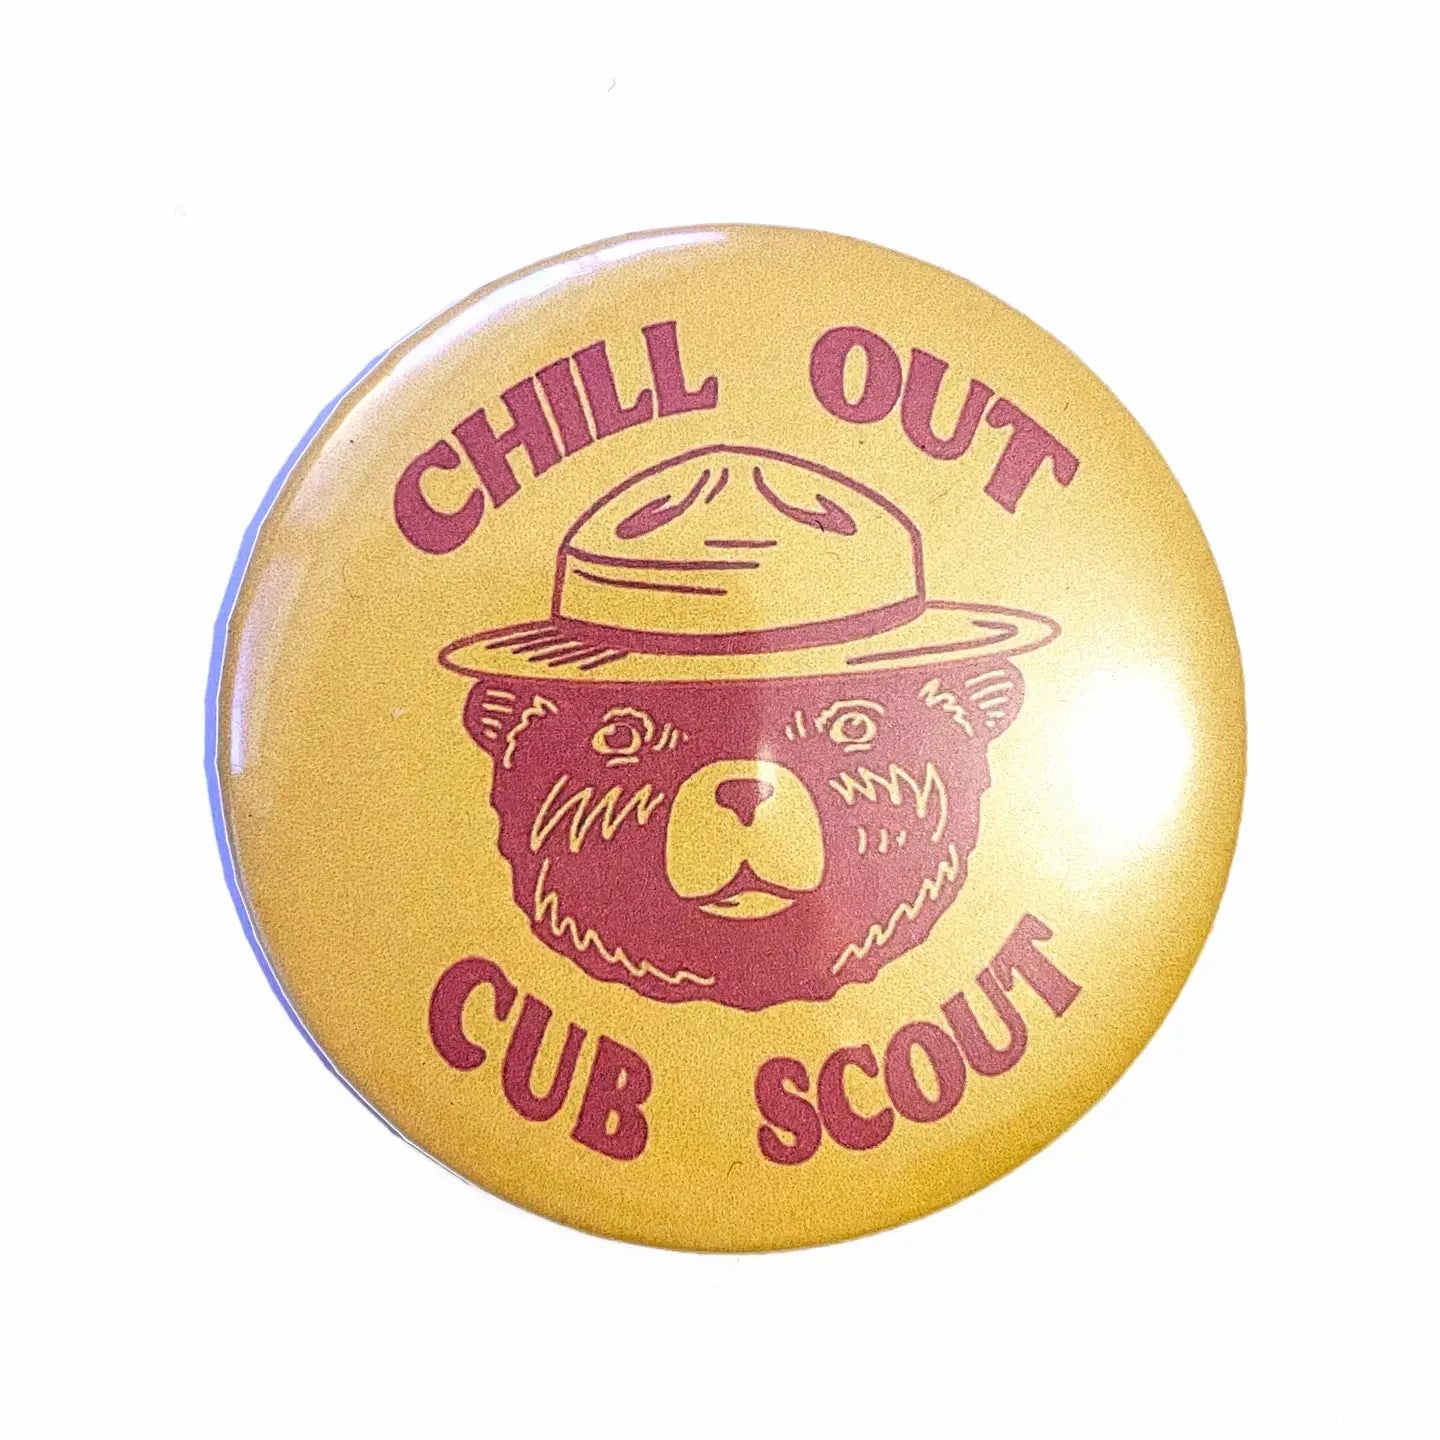 CHILL OUT CUB SCOUT badge